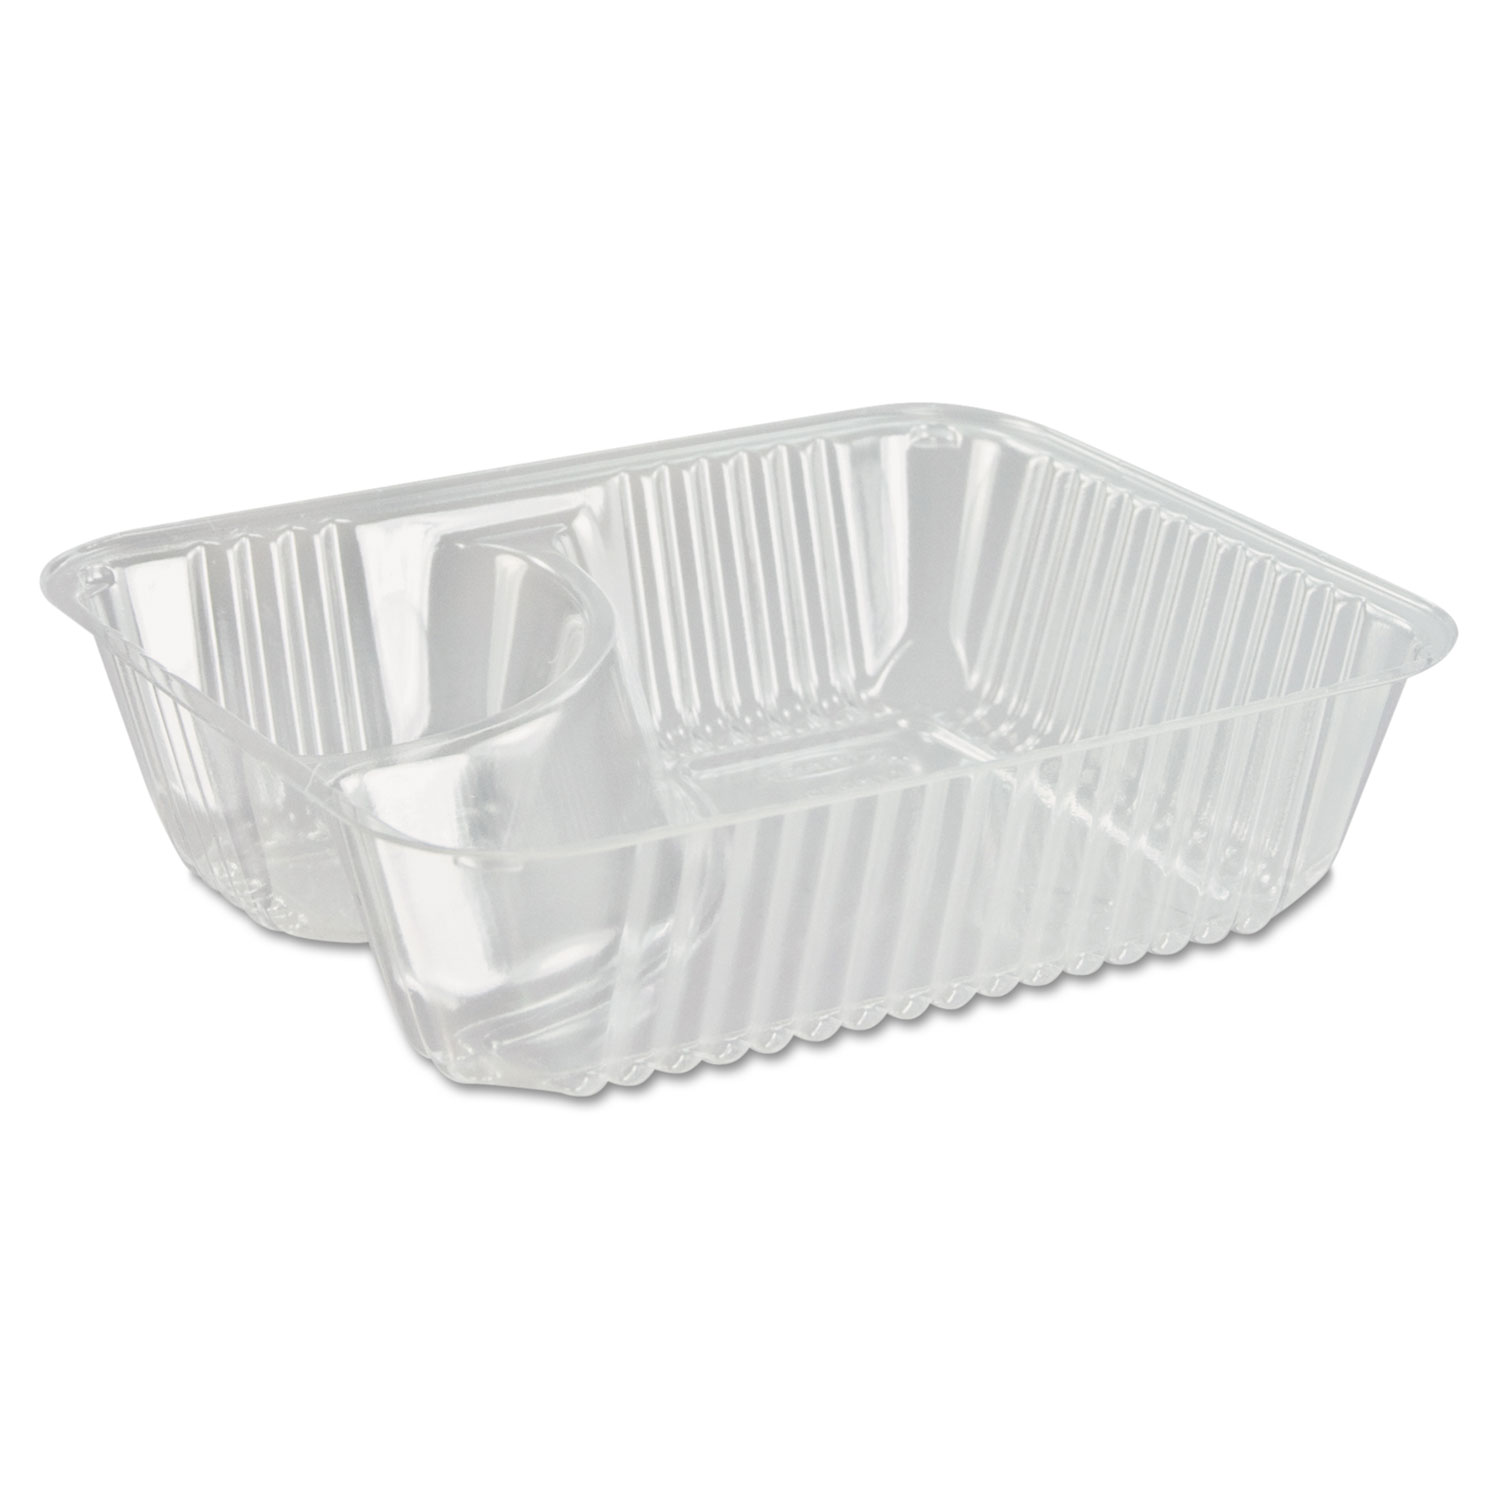  Dart C56NT2 ClearPac Small Nacho Tray, 2-Compartments, Clear, 125/Bag (DCCC56NT2) 